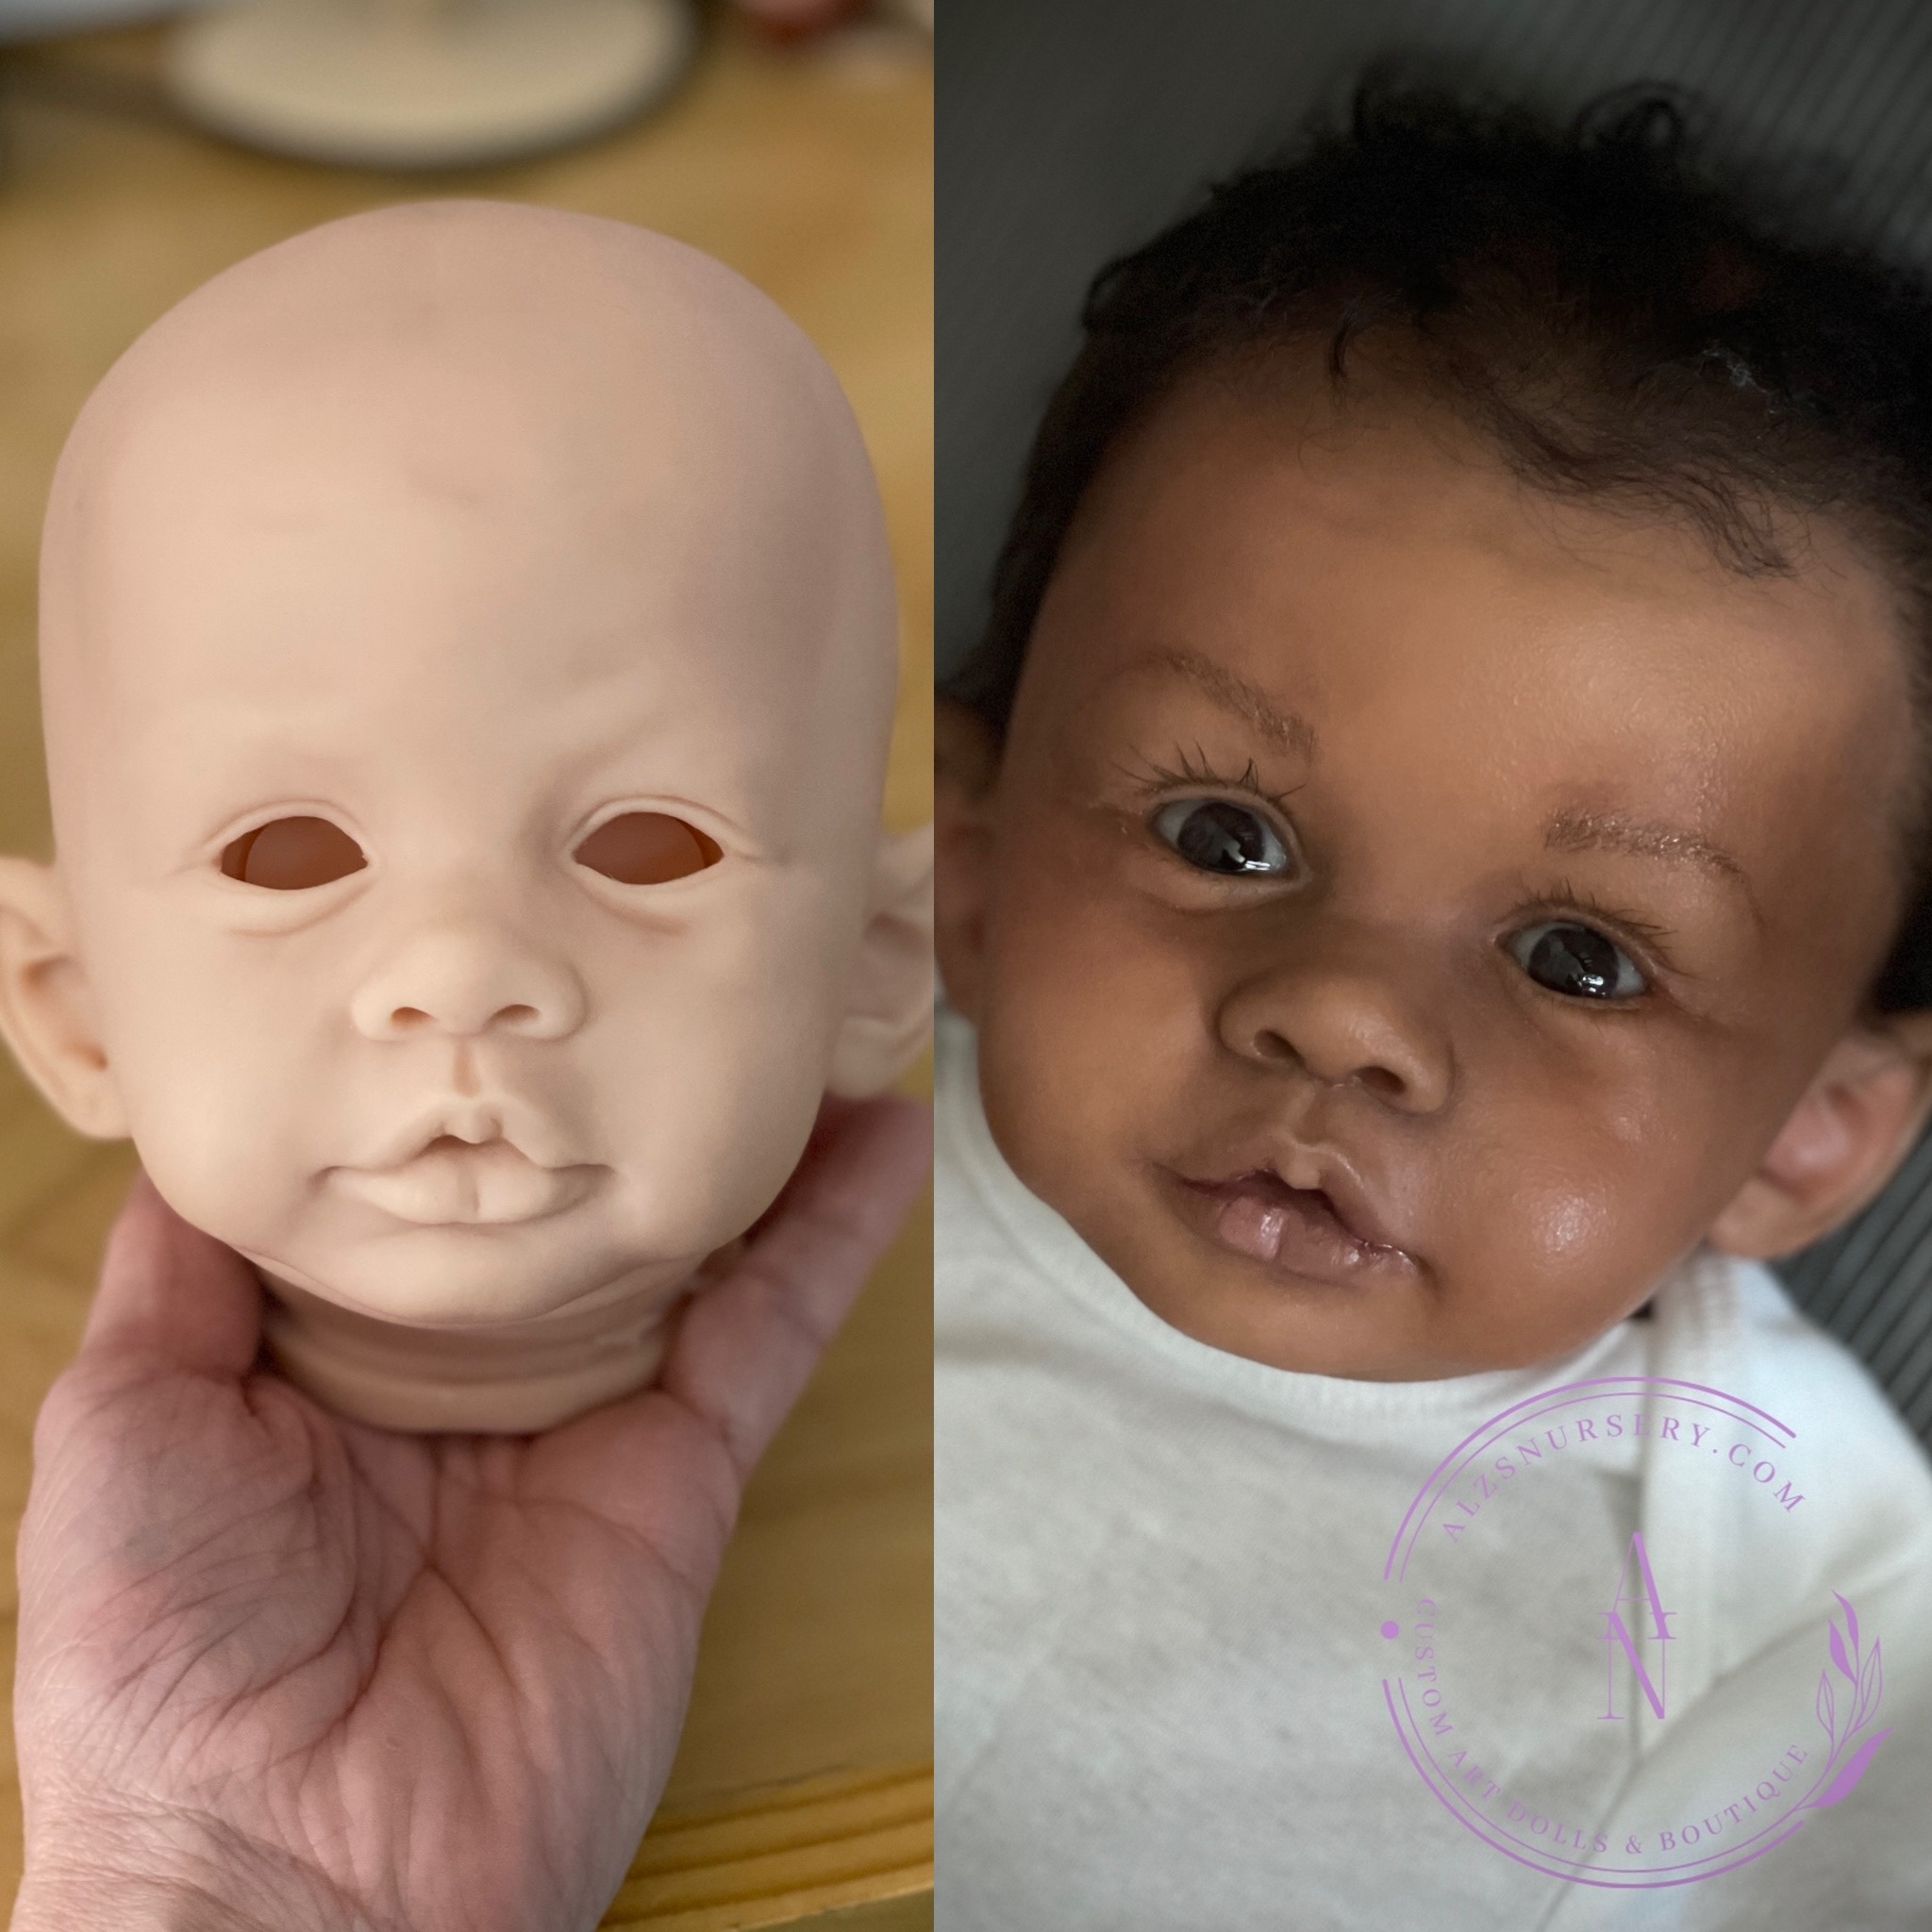 LE Zippy sculpt by Andrea Arcello, brought to life by Ginger Kelly with Alz’s Nursery